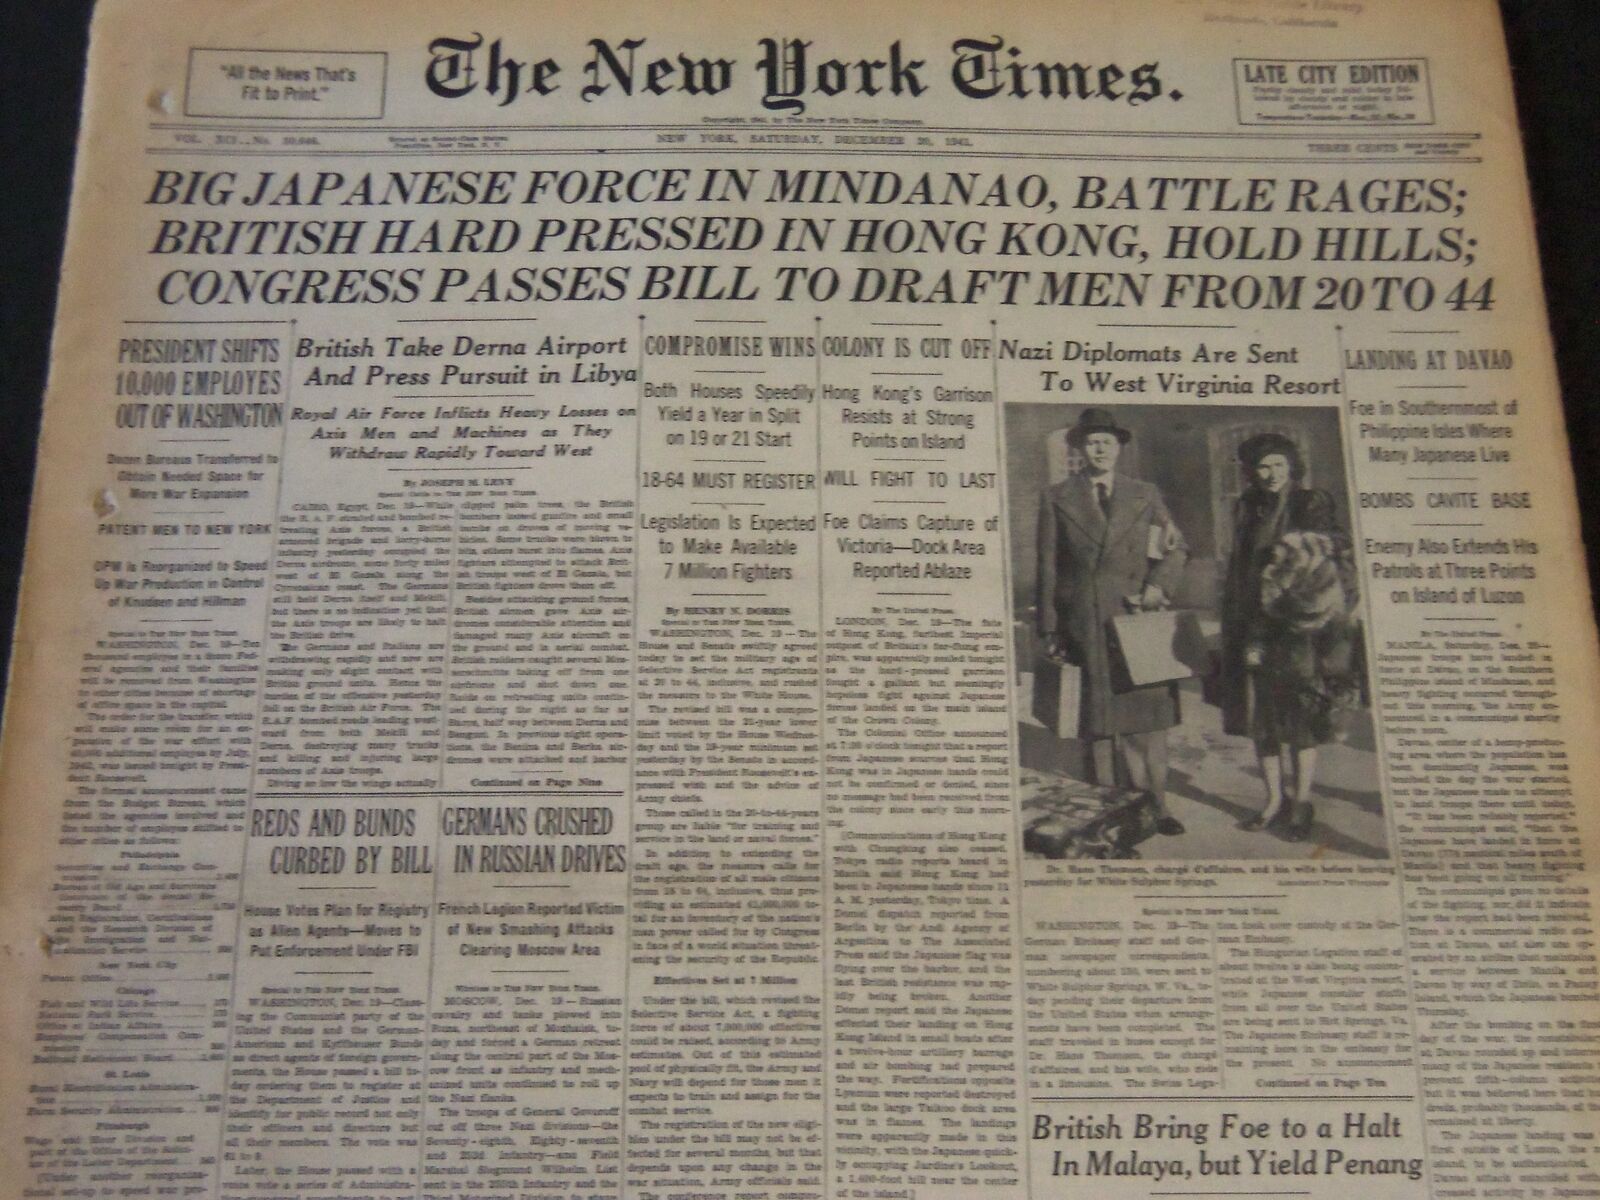 1941 DECEMBER 20 NEW YORK TIMES - BIG JAPANESE FORCE IN MINDANAO - NT 6160